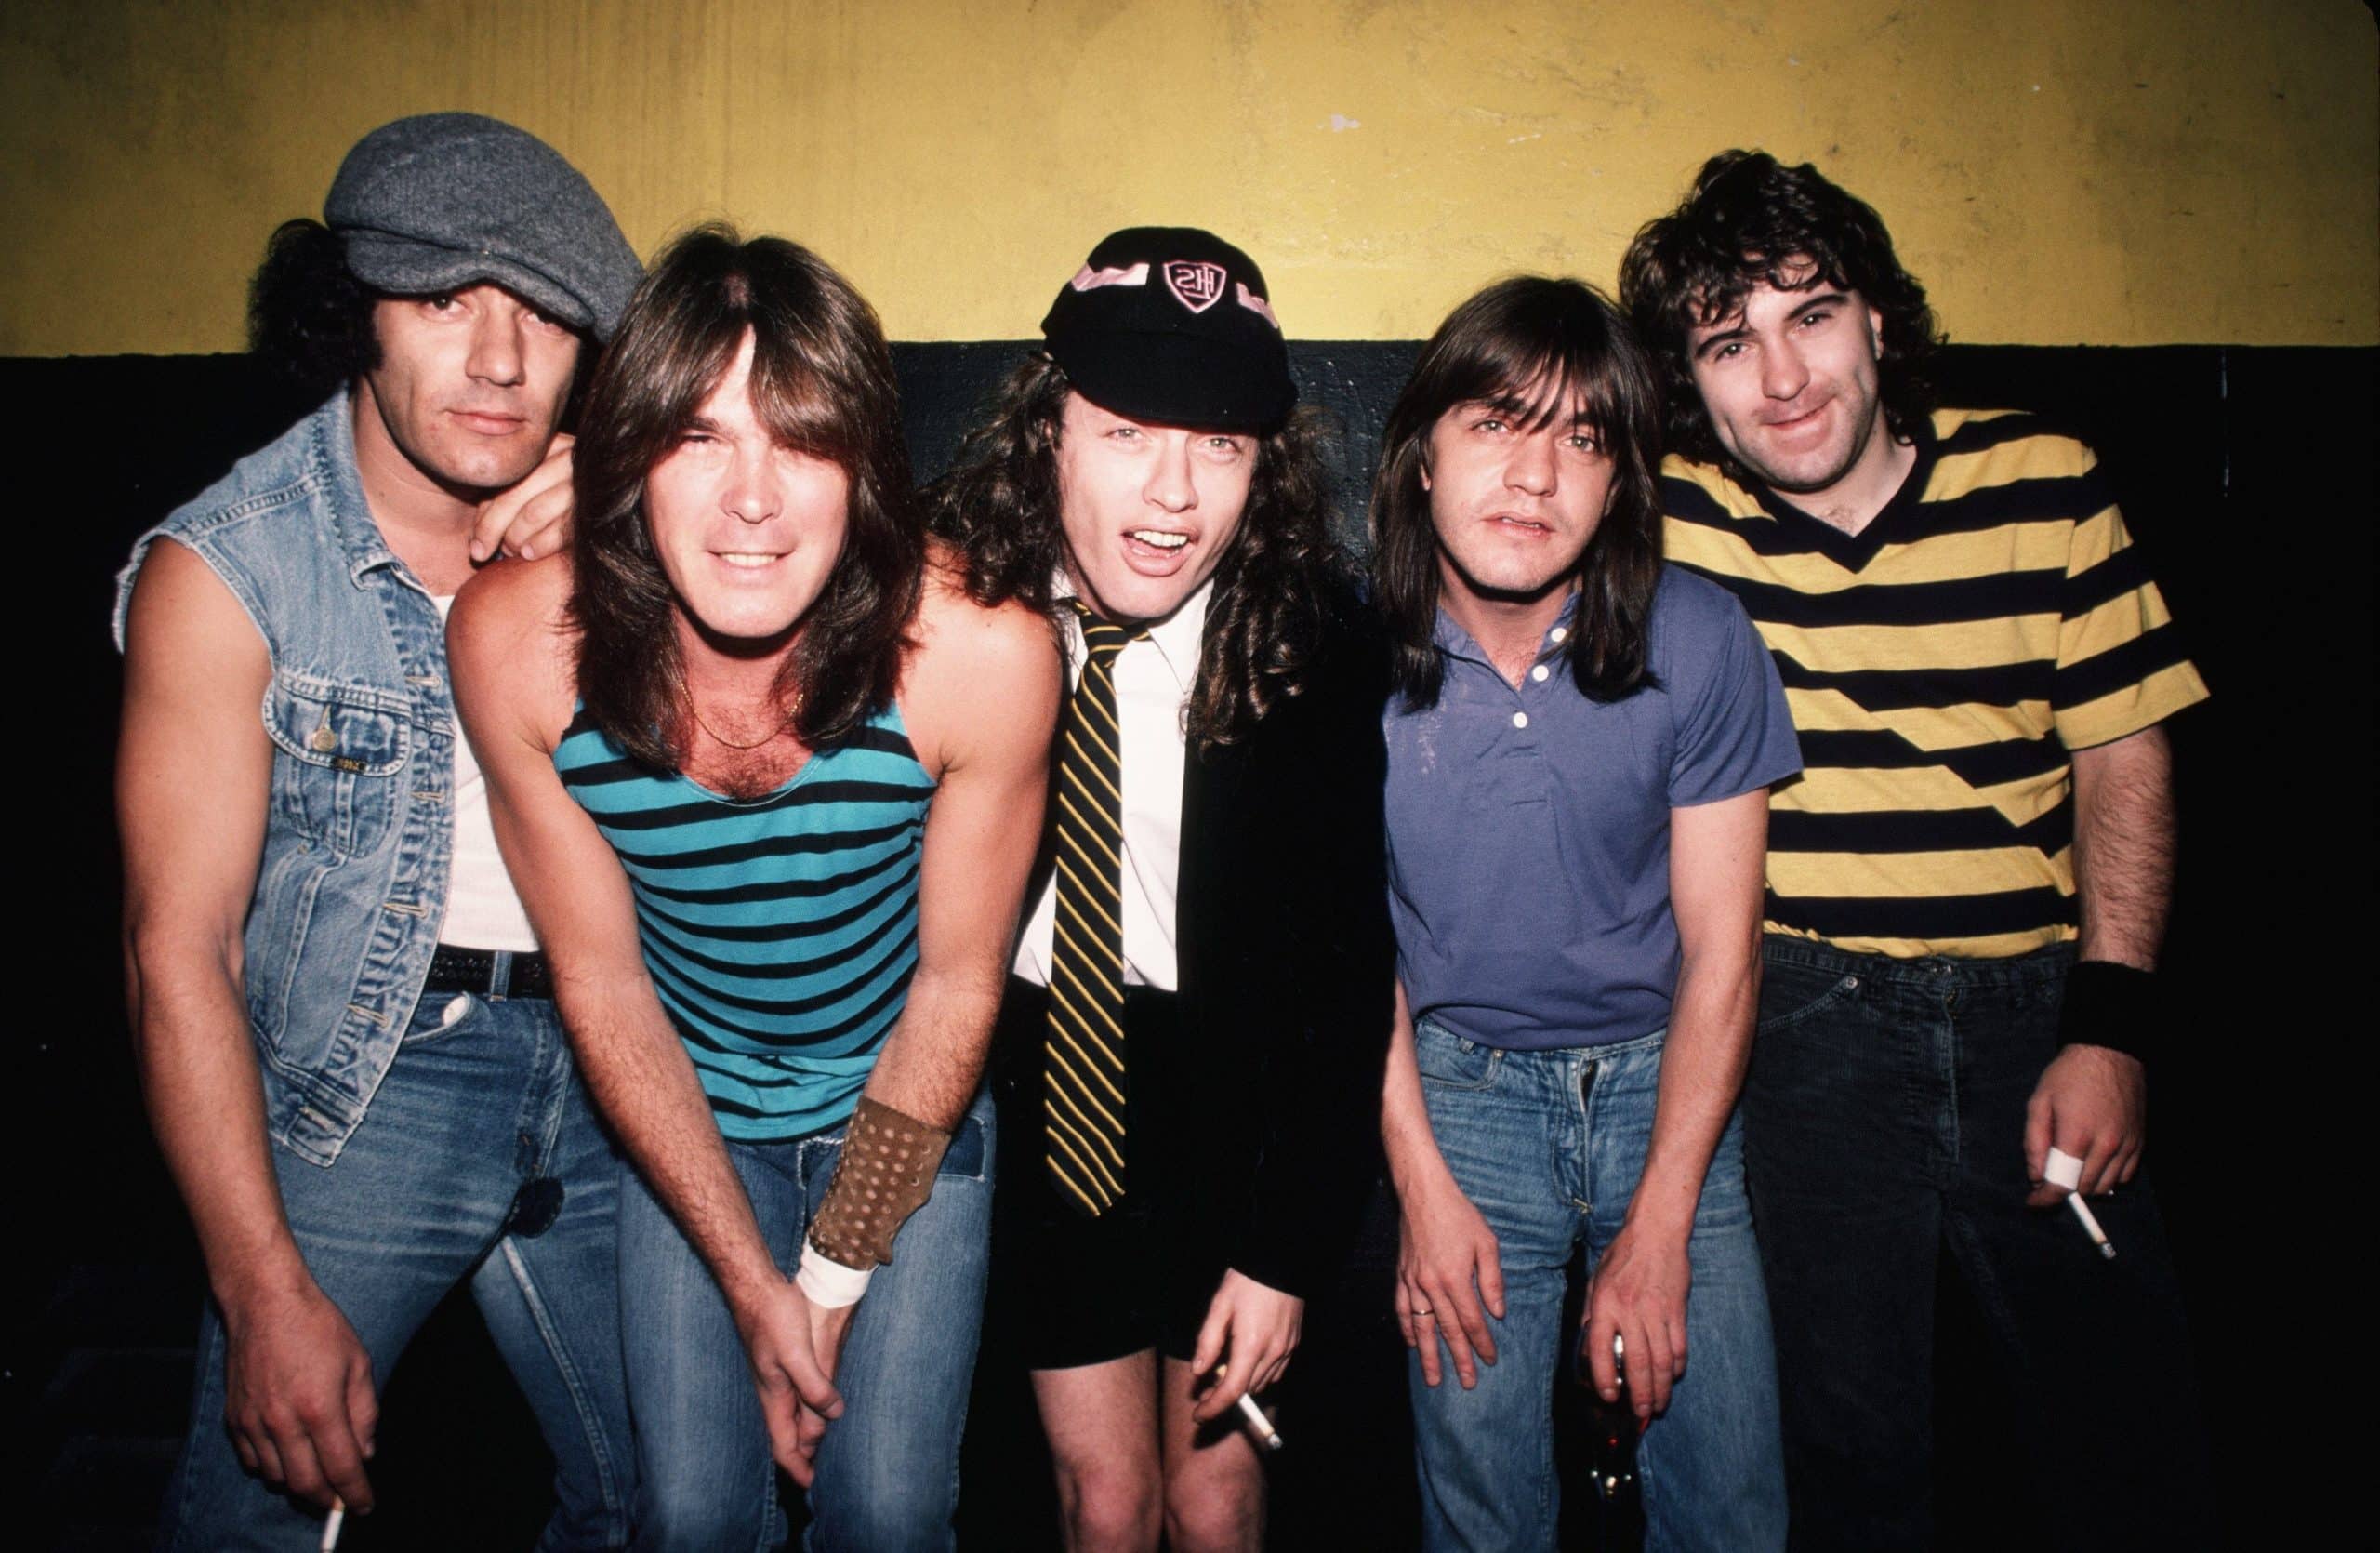 The impossible return of AC/DC: 'You could feel the electricity in the air', AC/DC